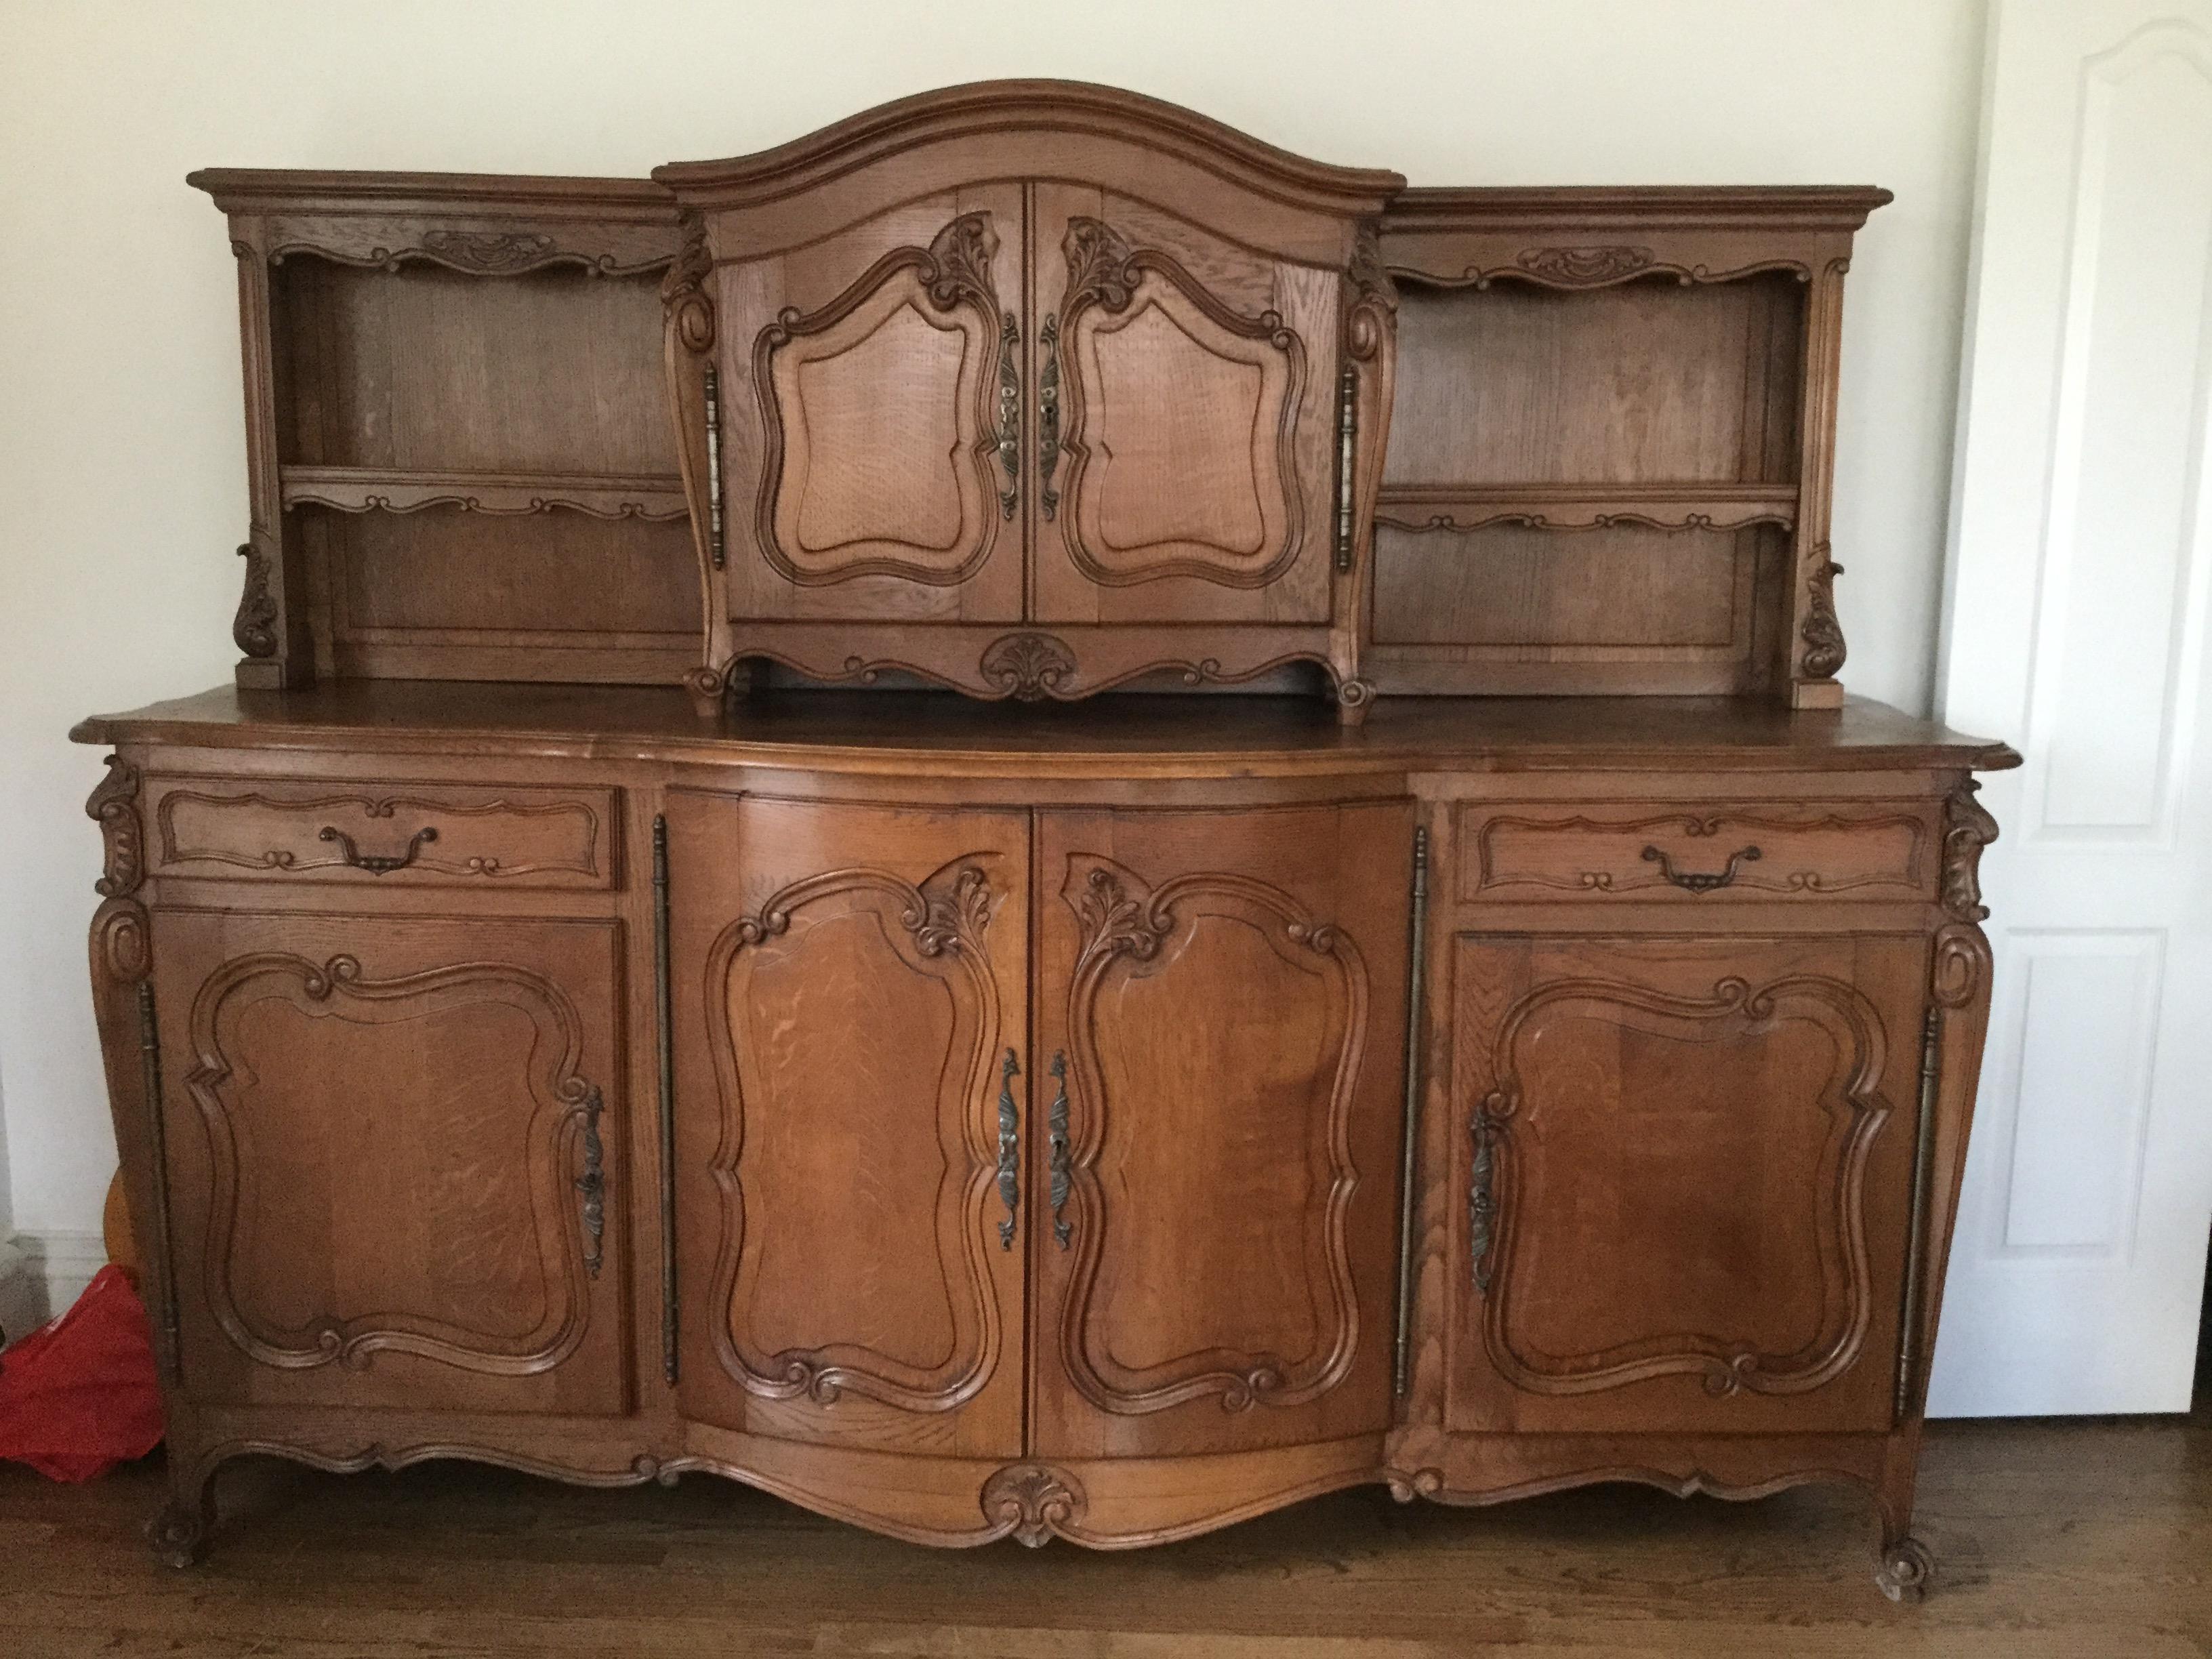 This handsome French sideboard features a large bottom cabinet and a top shelf. Made of solid French oak, this piece has the charm of a rounded front, carved floral motifs and acanthus leaves. With lots of drawers and shelves, this sideboard